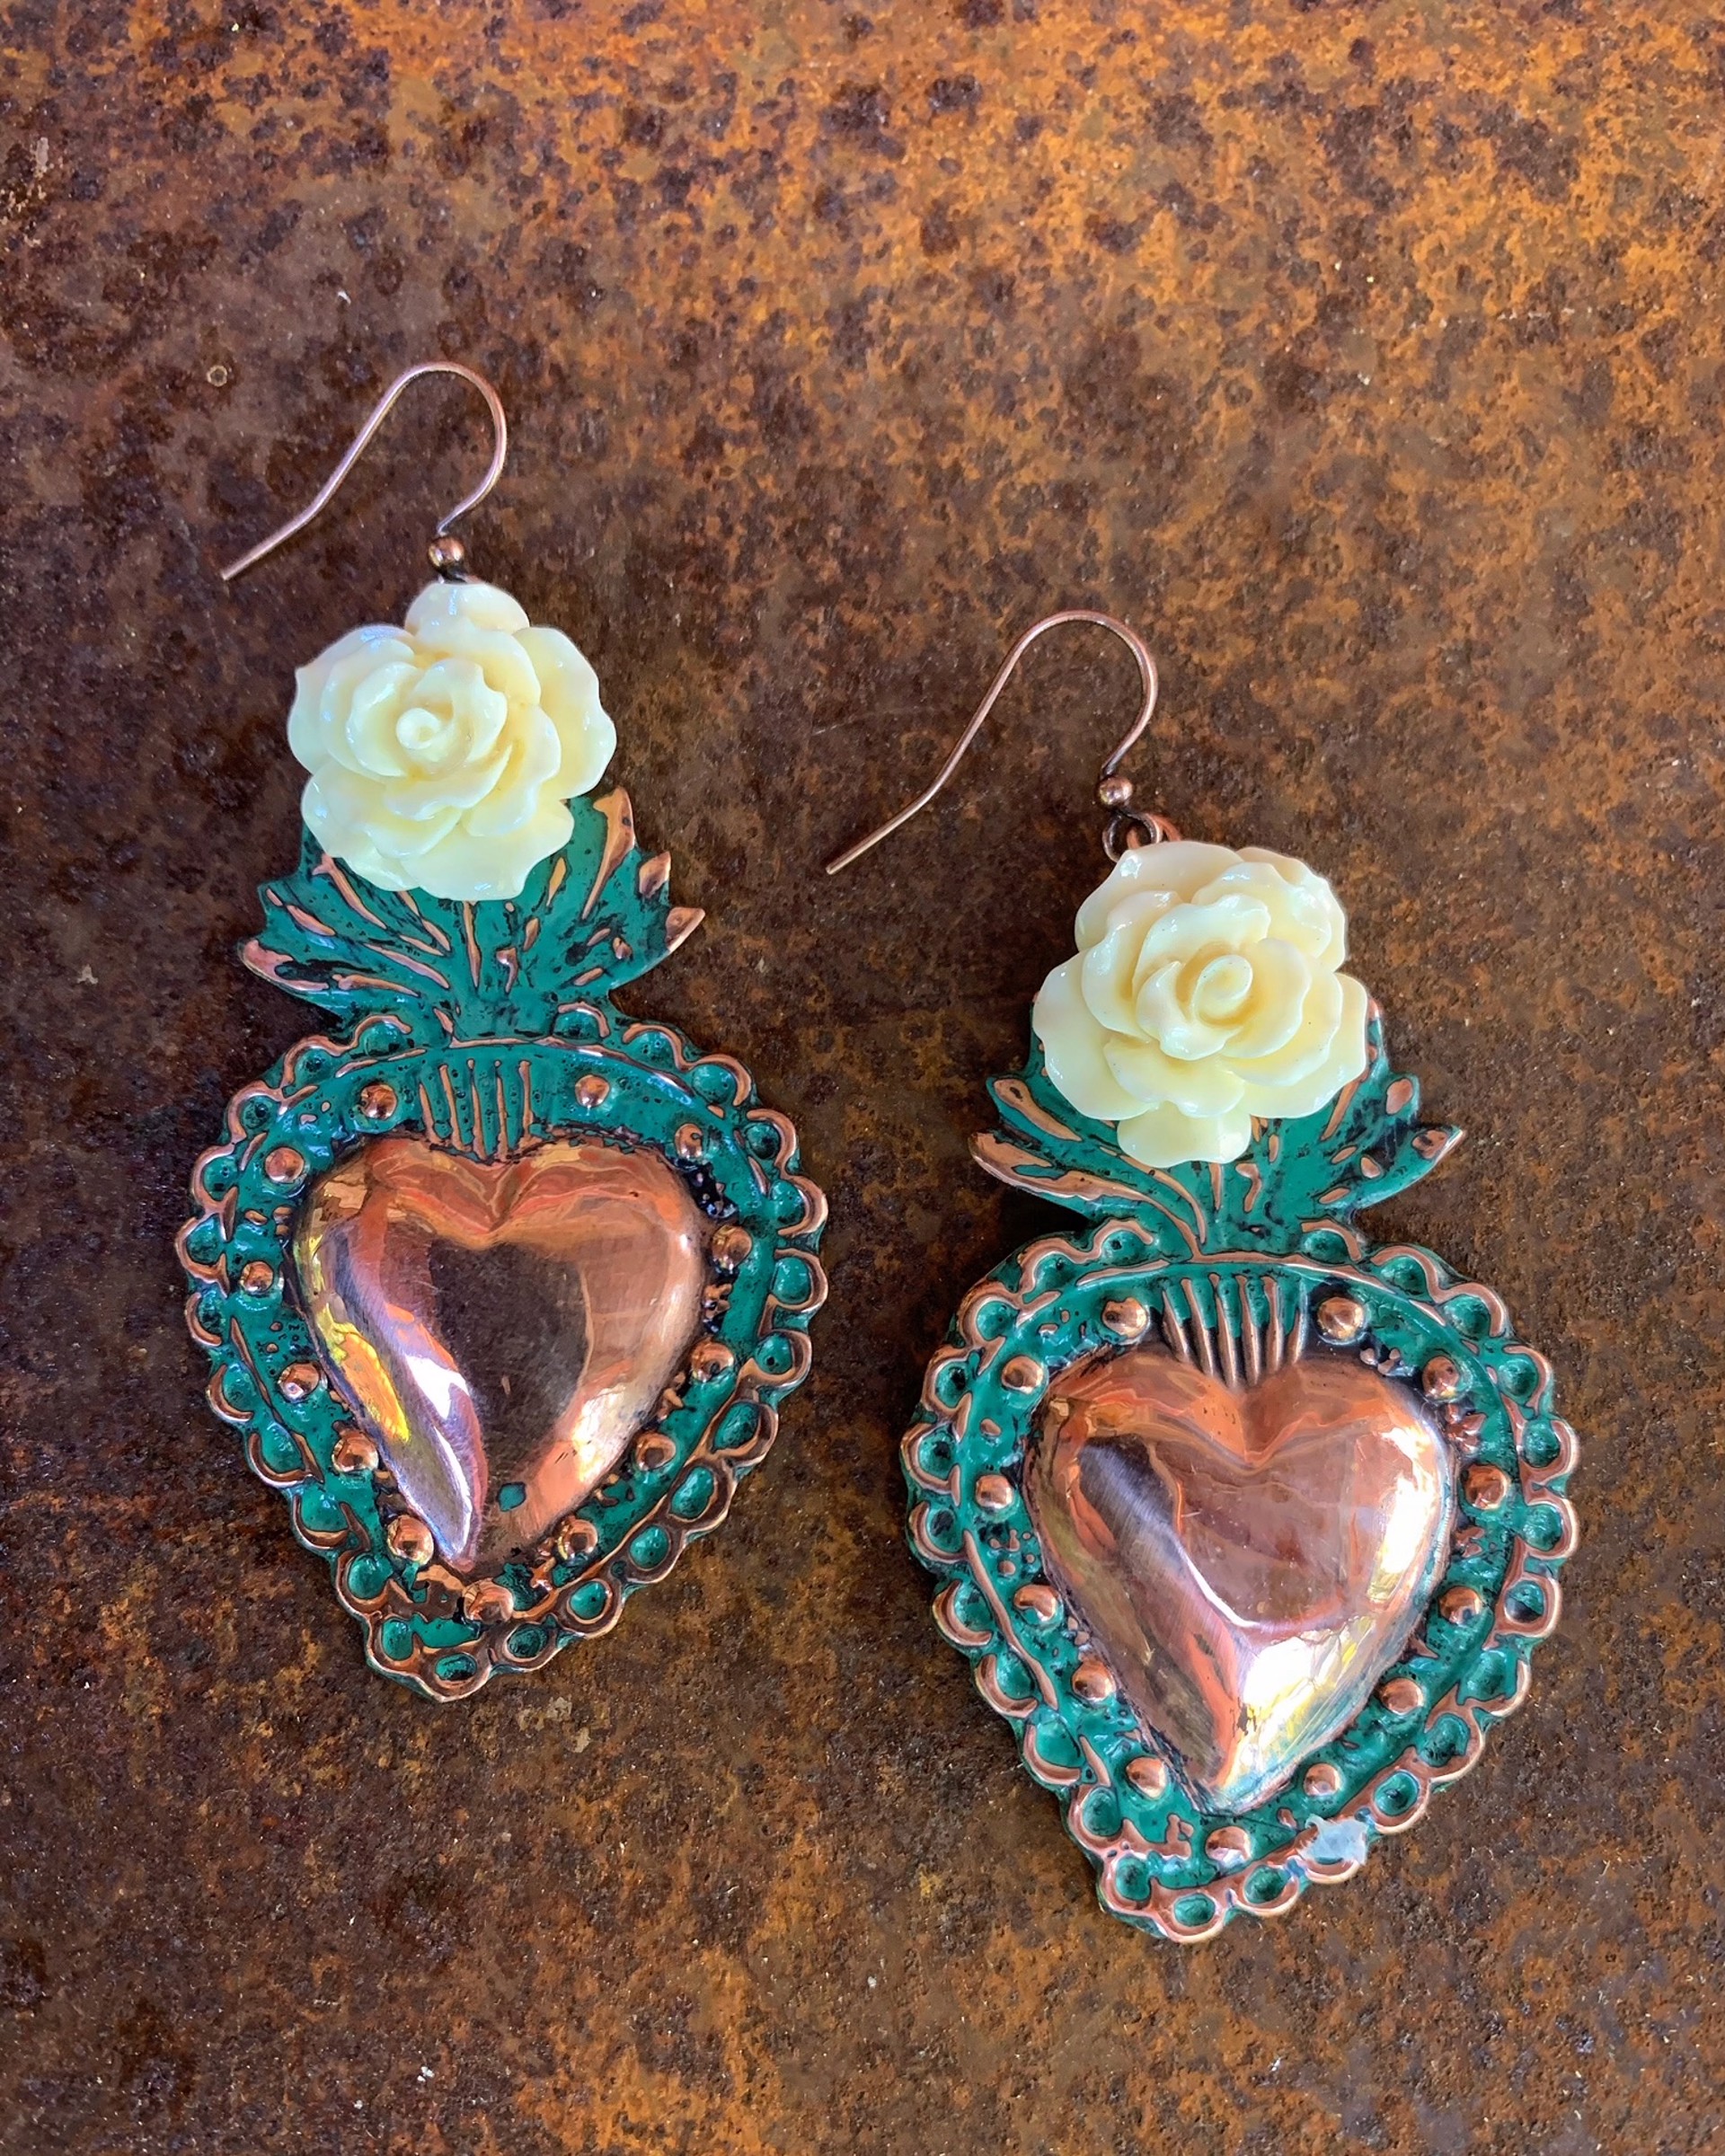 K853 Sacred Heart Earrings with White Roses by Kelly Ormsby